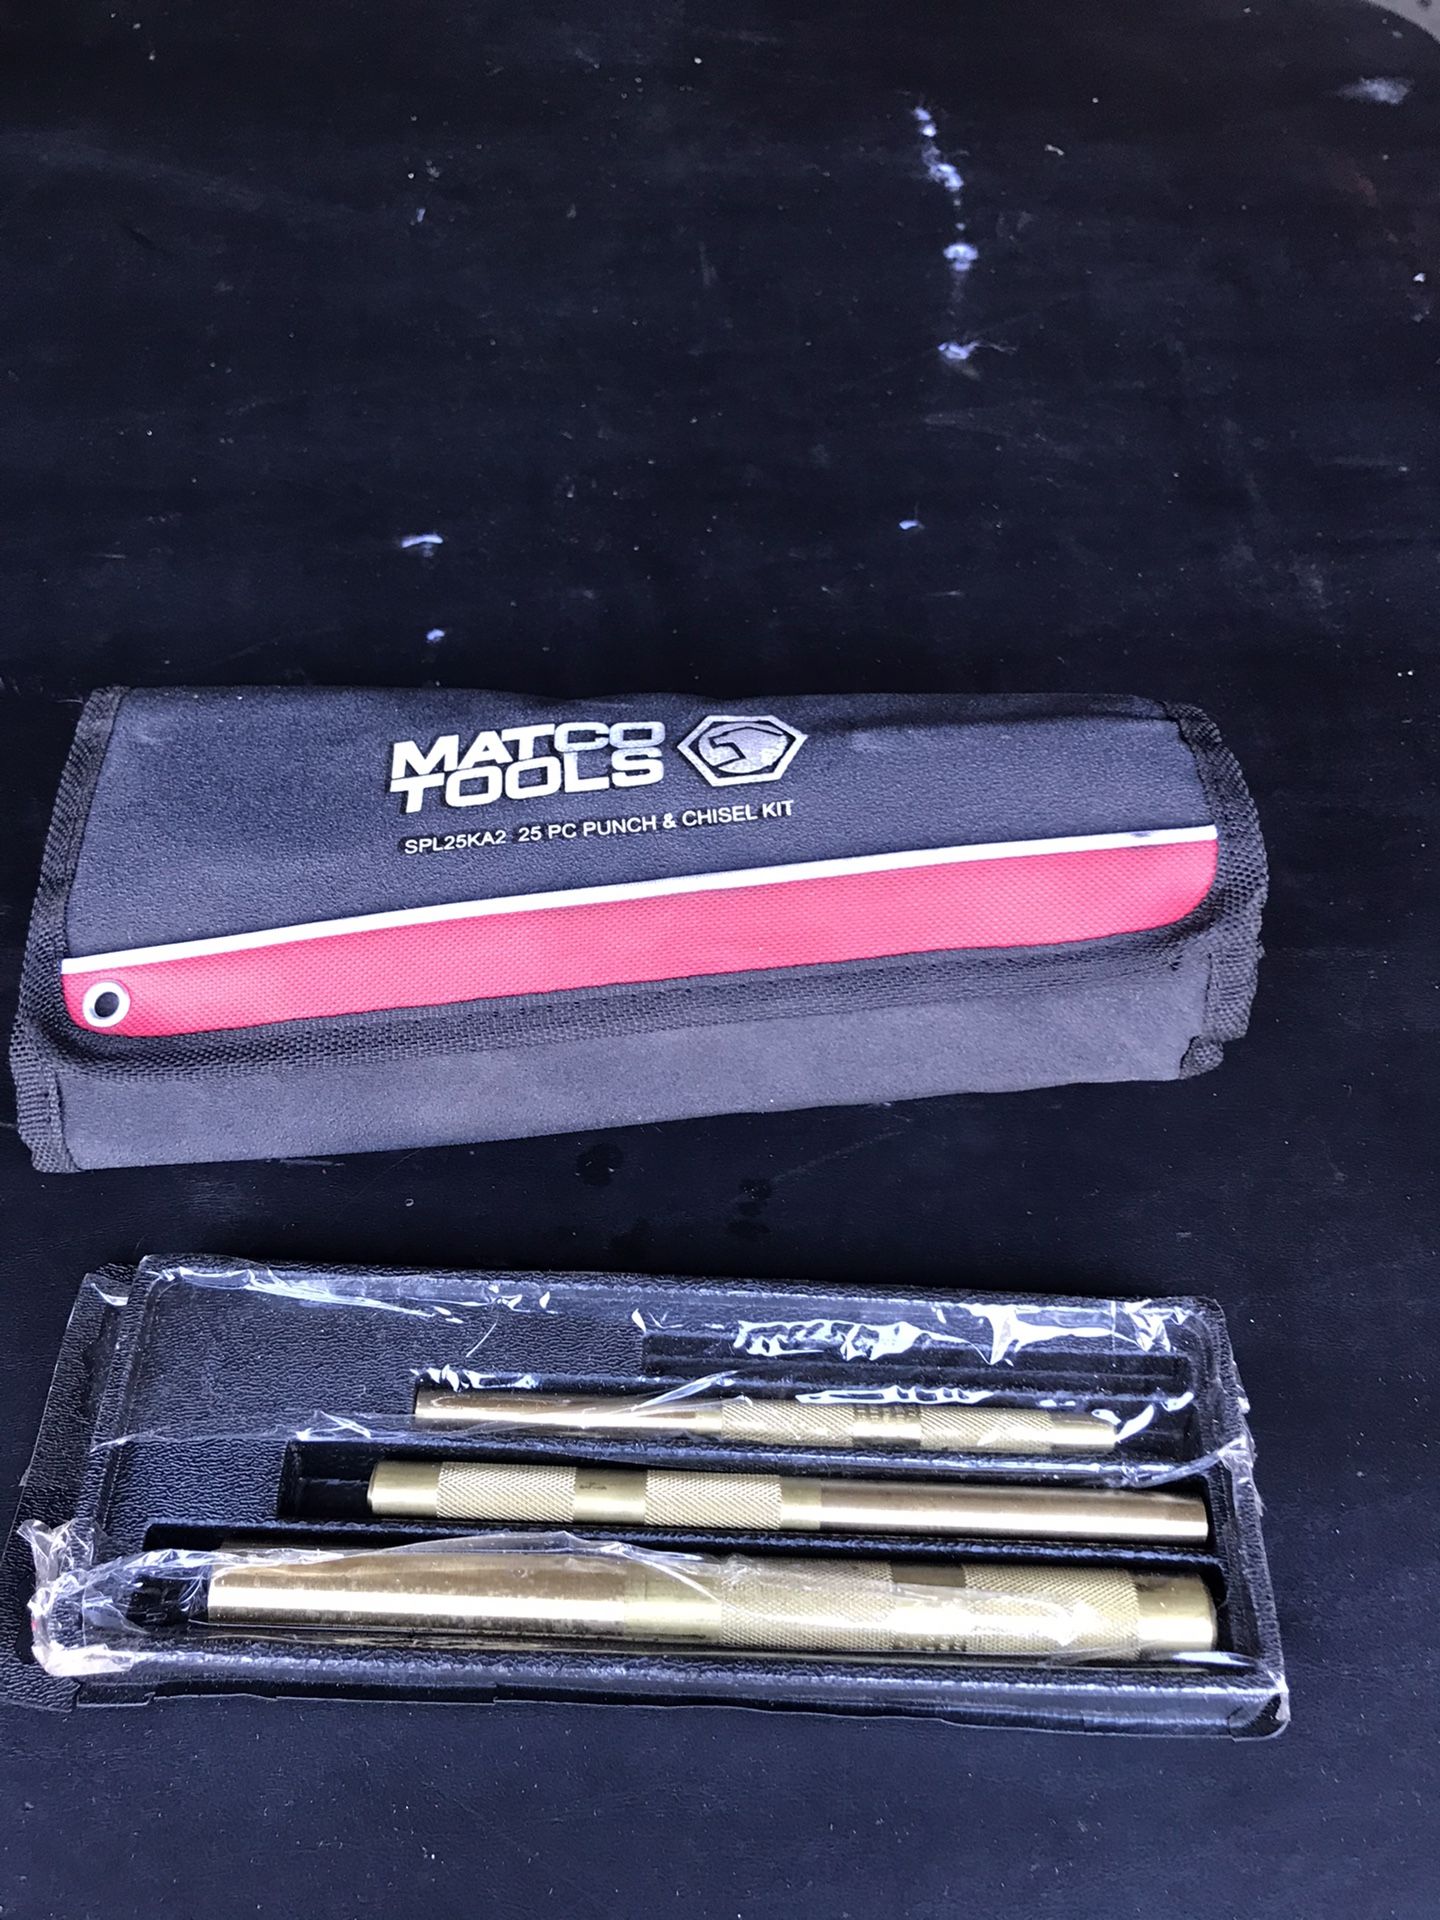 Matco 25 Pieces Master Punch and Chisel,, Holder and 3 Brass Punches ( Same like Snap On Tools ) Mod# SPL25KA2,, Excellent Conditions